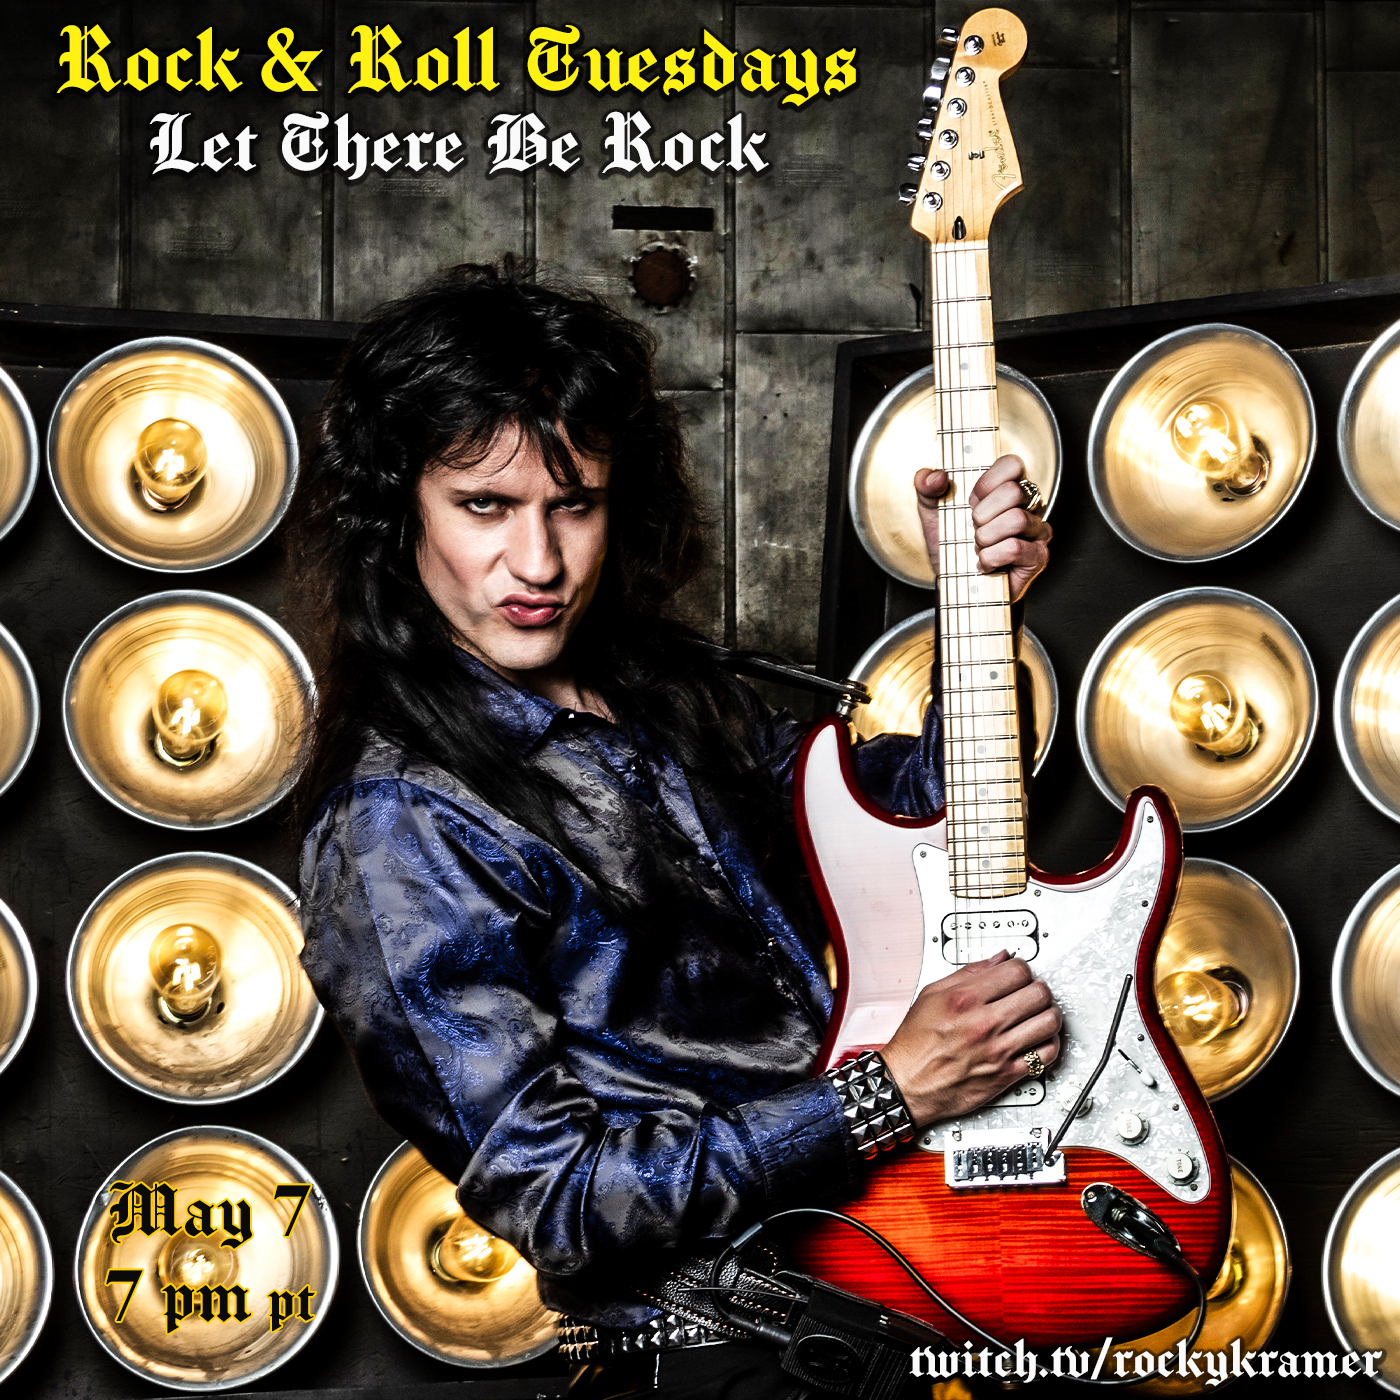 Rocky Kramer’s Rock & Roll Tuesdays Presents “Let There Be Rock” On 5/7/24, 7 PM PT on Twitch